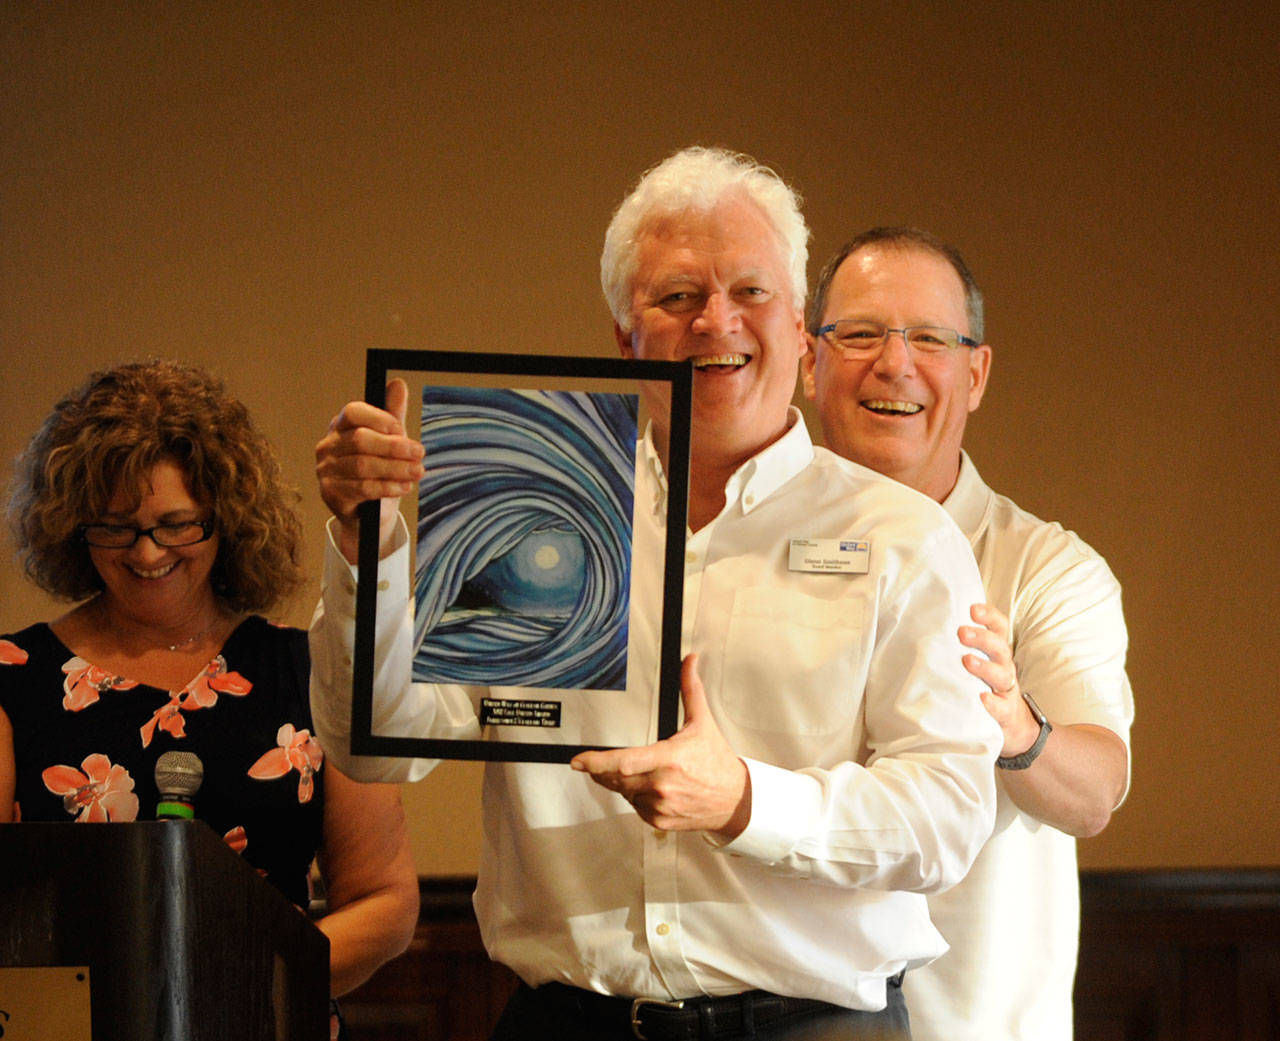 Glenn Smithson, 7 Cedars Casino General Manager, accepts a United Way of Clallam County award at the organization’s annual Campaign Celebration at The Cedars at Dungeness on May 9. Presenting the award are 2018 campaign chair Lori Taylor and board member/2017 campaign chair Chris Szczepczynski. Sequim Gazette photo by Michael Dashiell